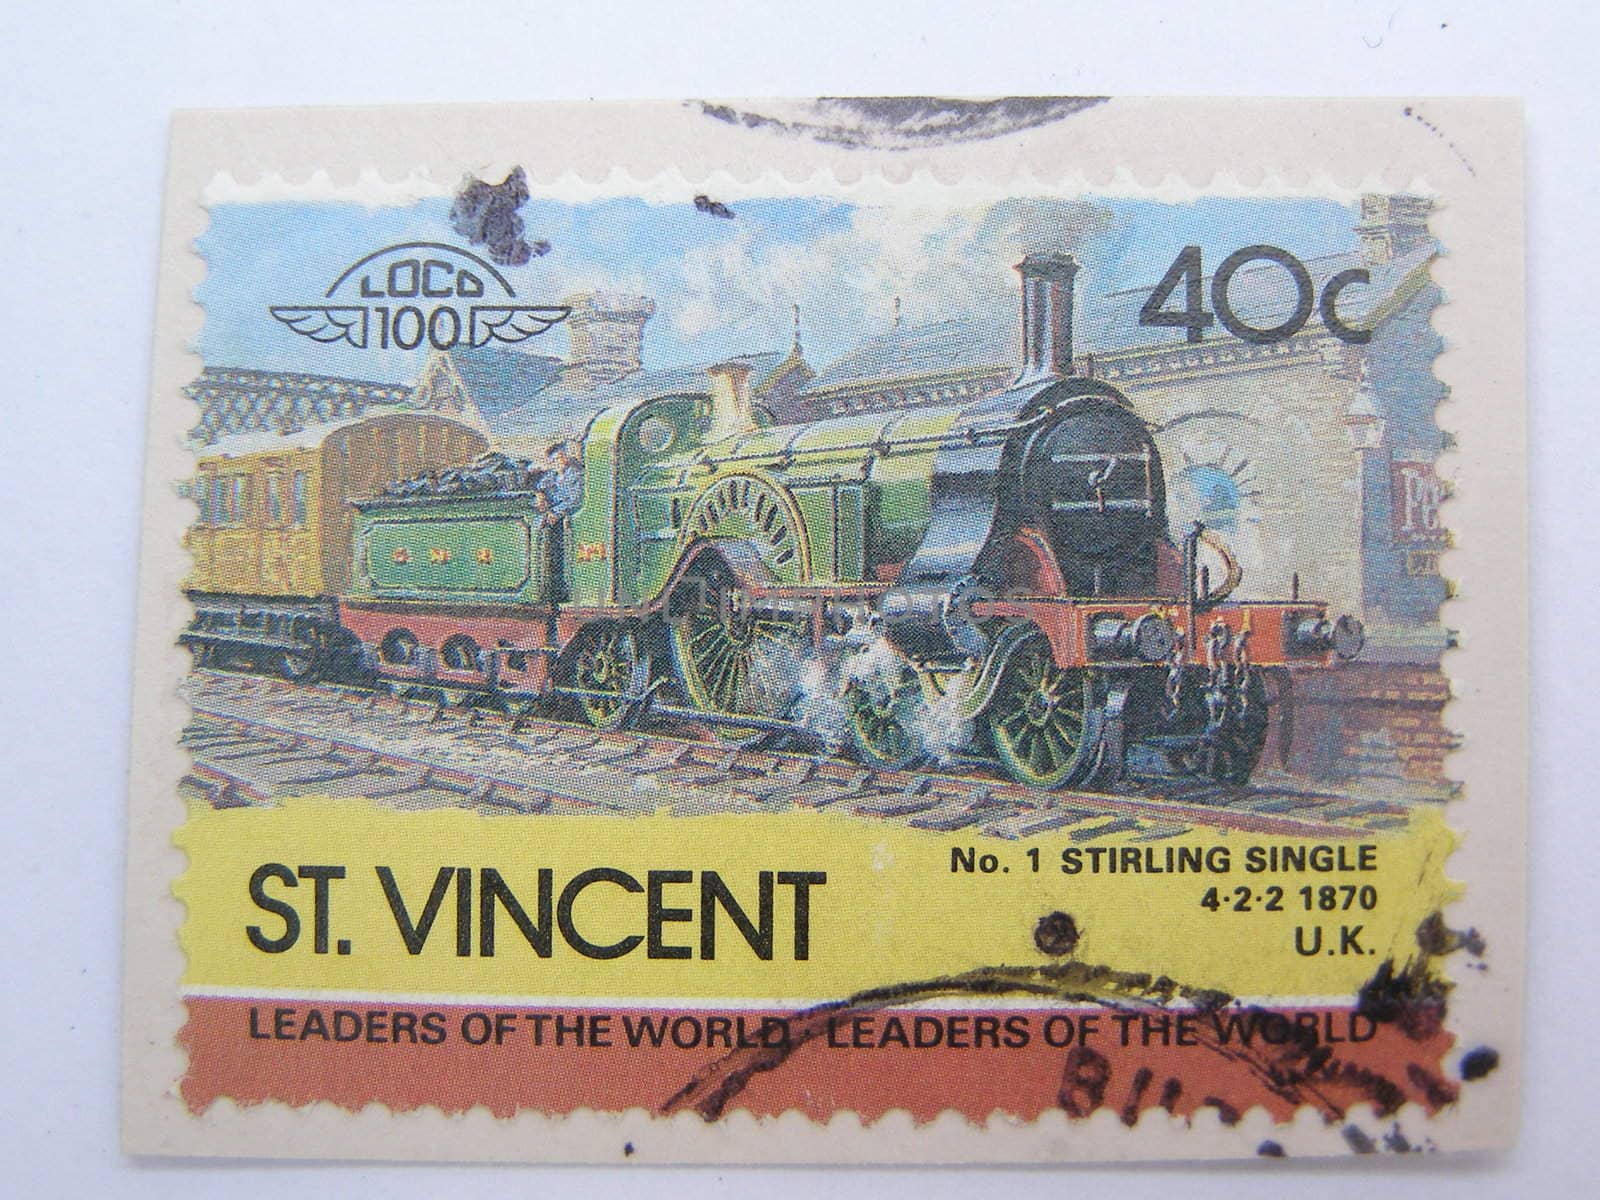 St. Vincent stamp by paolo77